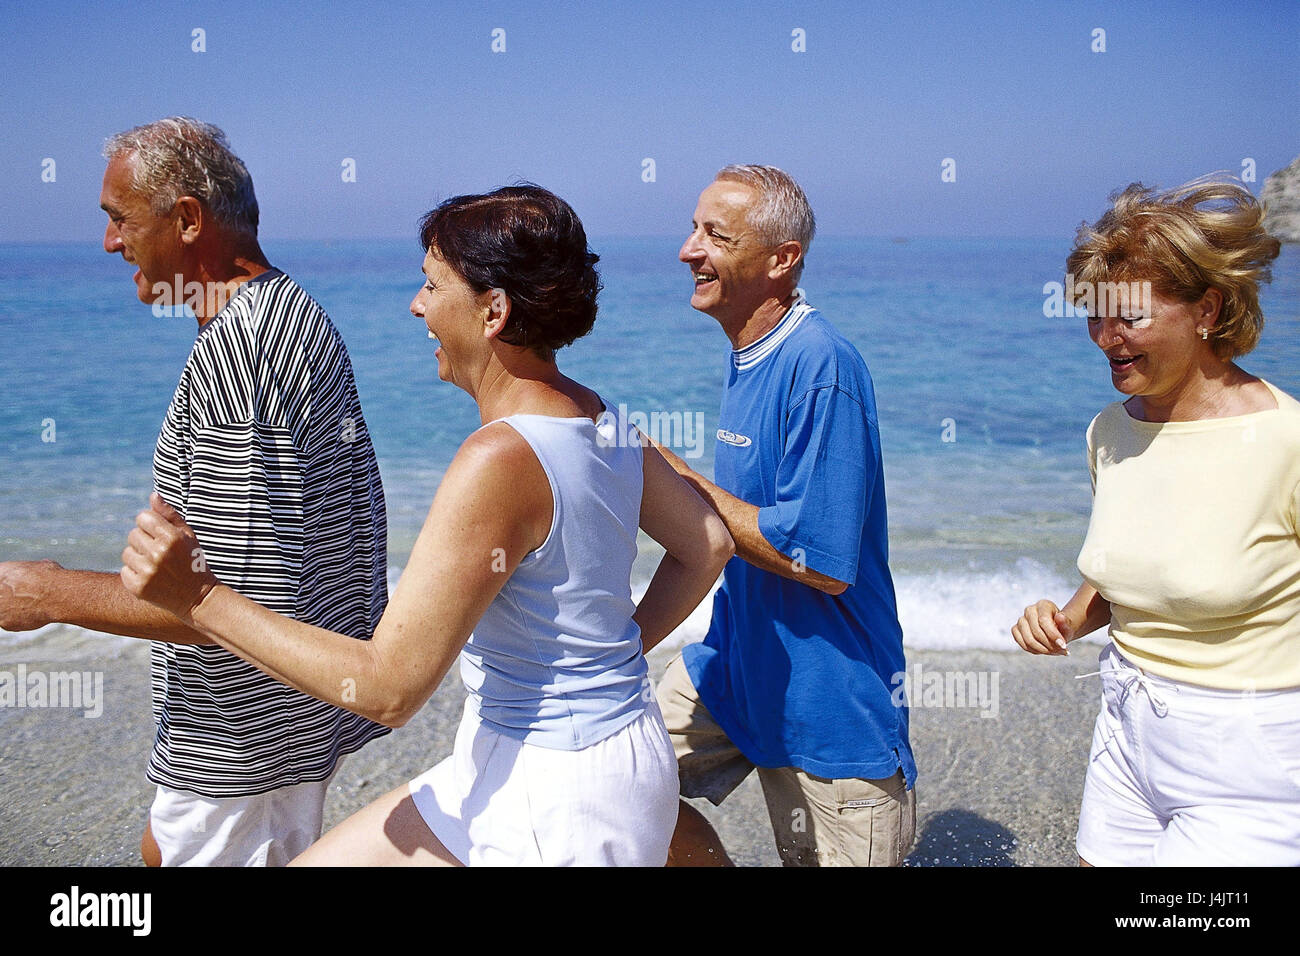 Couples, middle old person, beach run, half portrait outside, summer, vacation, leisure time, lifestyle, four, friends, together, fun, happily, tuning, positively, sport, sportily, beach, sea, run, jog, jogging, fit fitness, agile, motion, activity, leisurewear Stock Photo